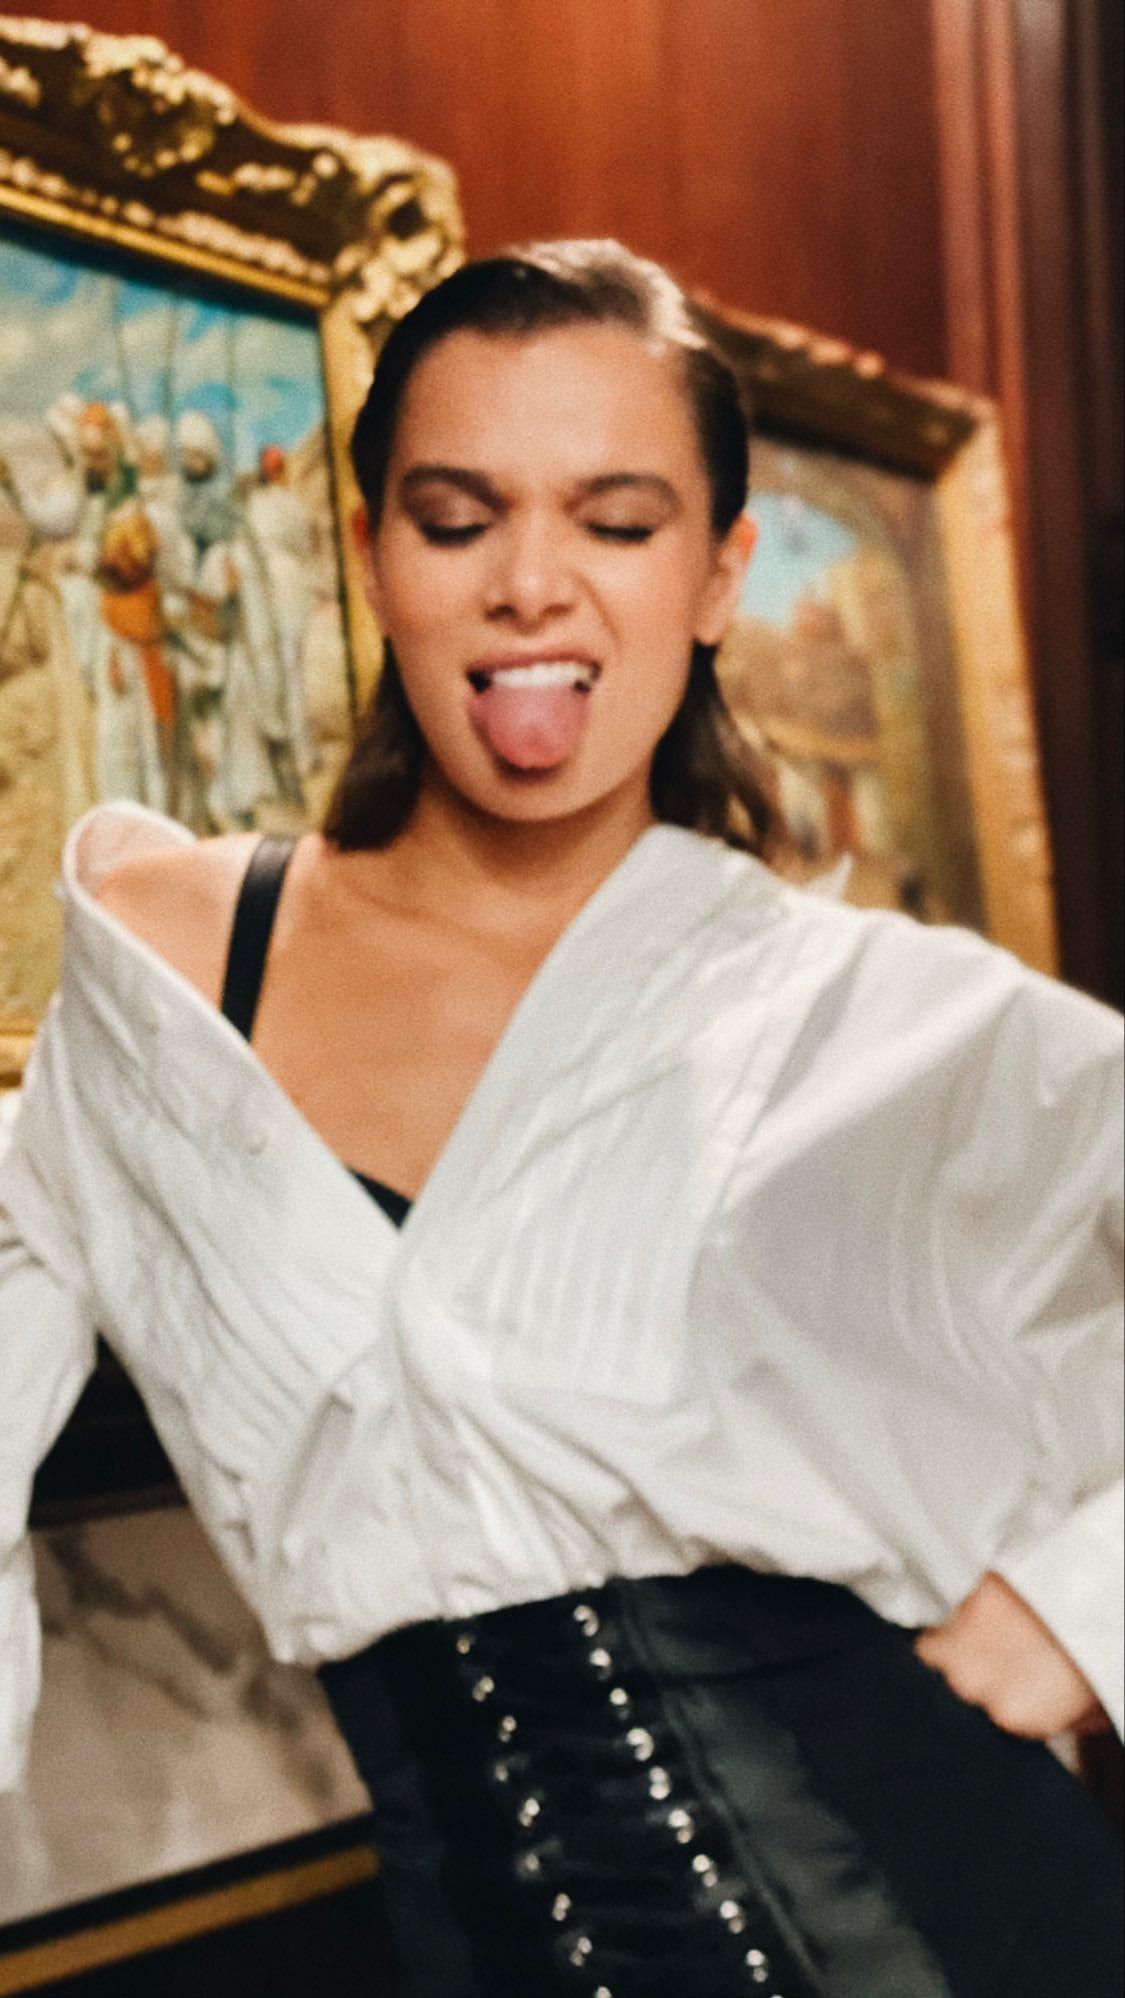 I'm 100% convinced Hailee Steinfeld has some kind of oral fixation. She strikes me as the girl who demands you shove your fingers in her mouth while you're fucking her